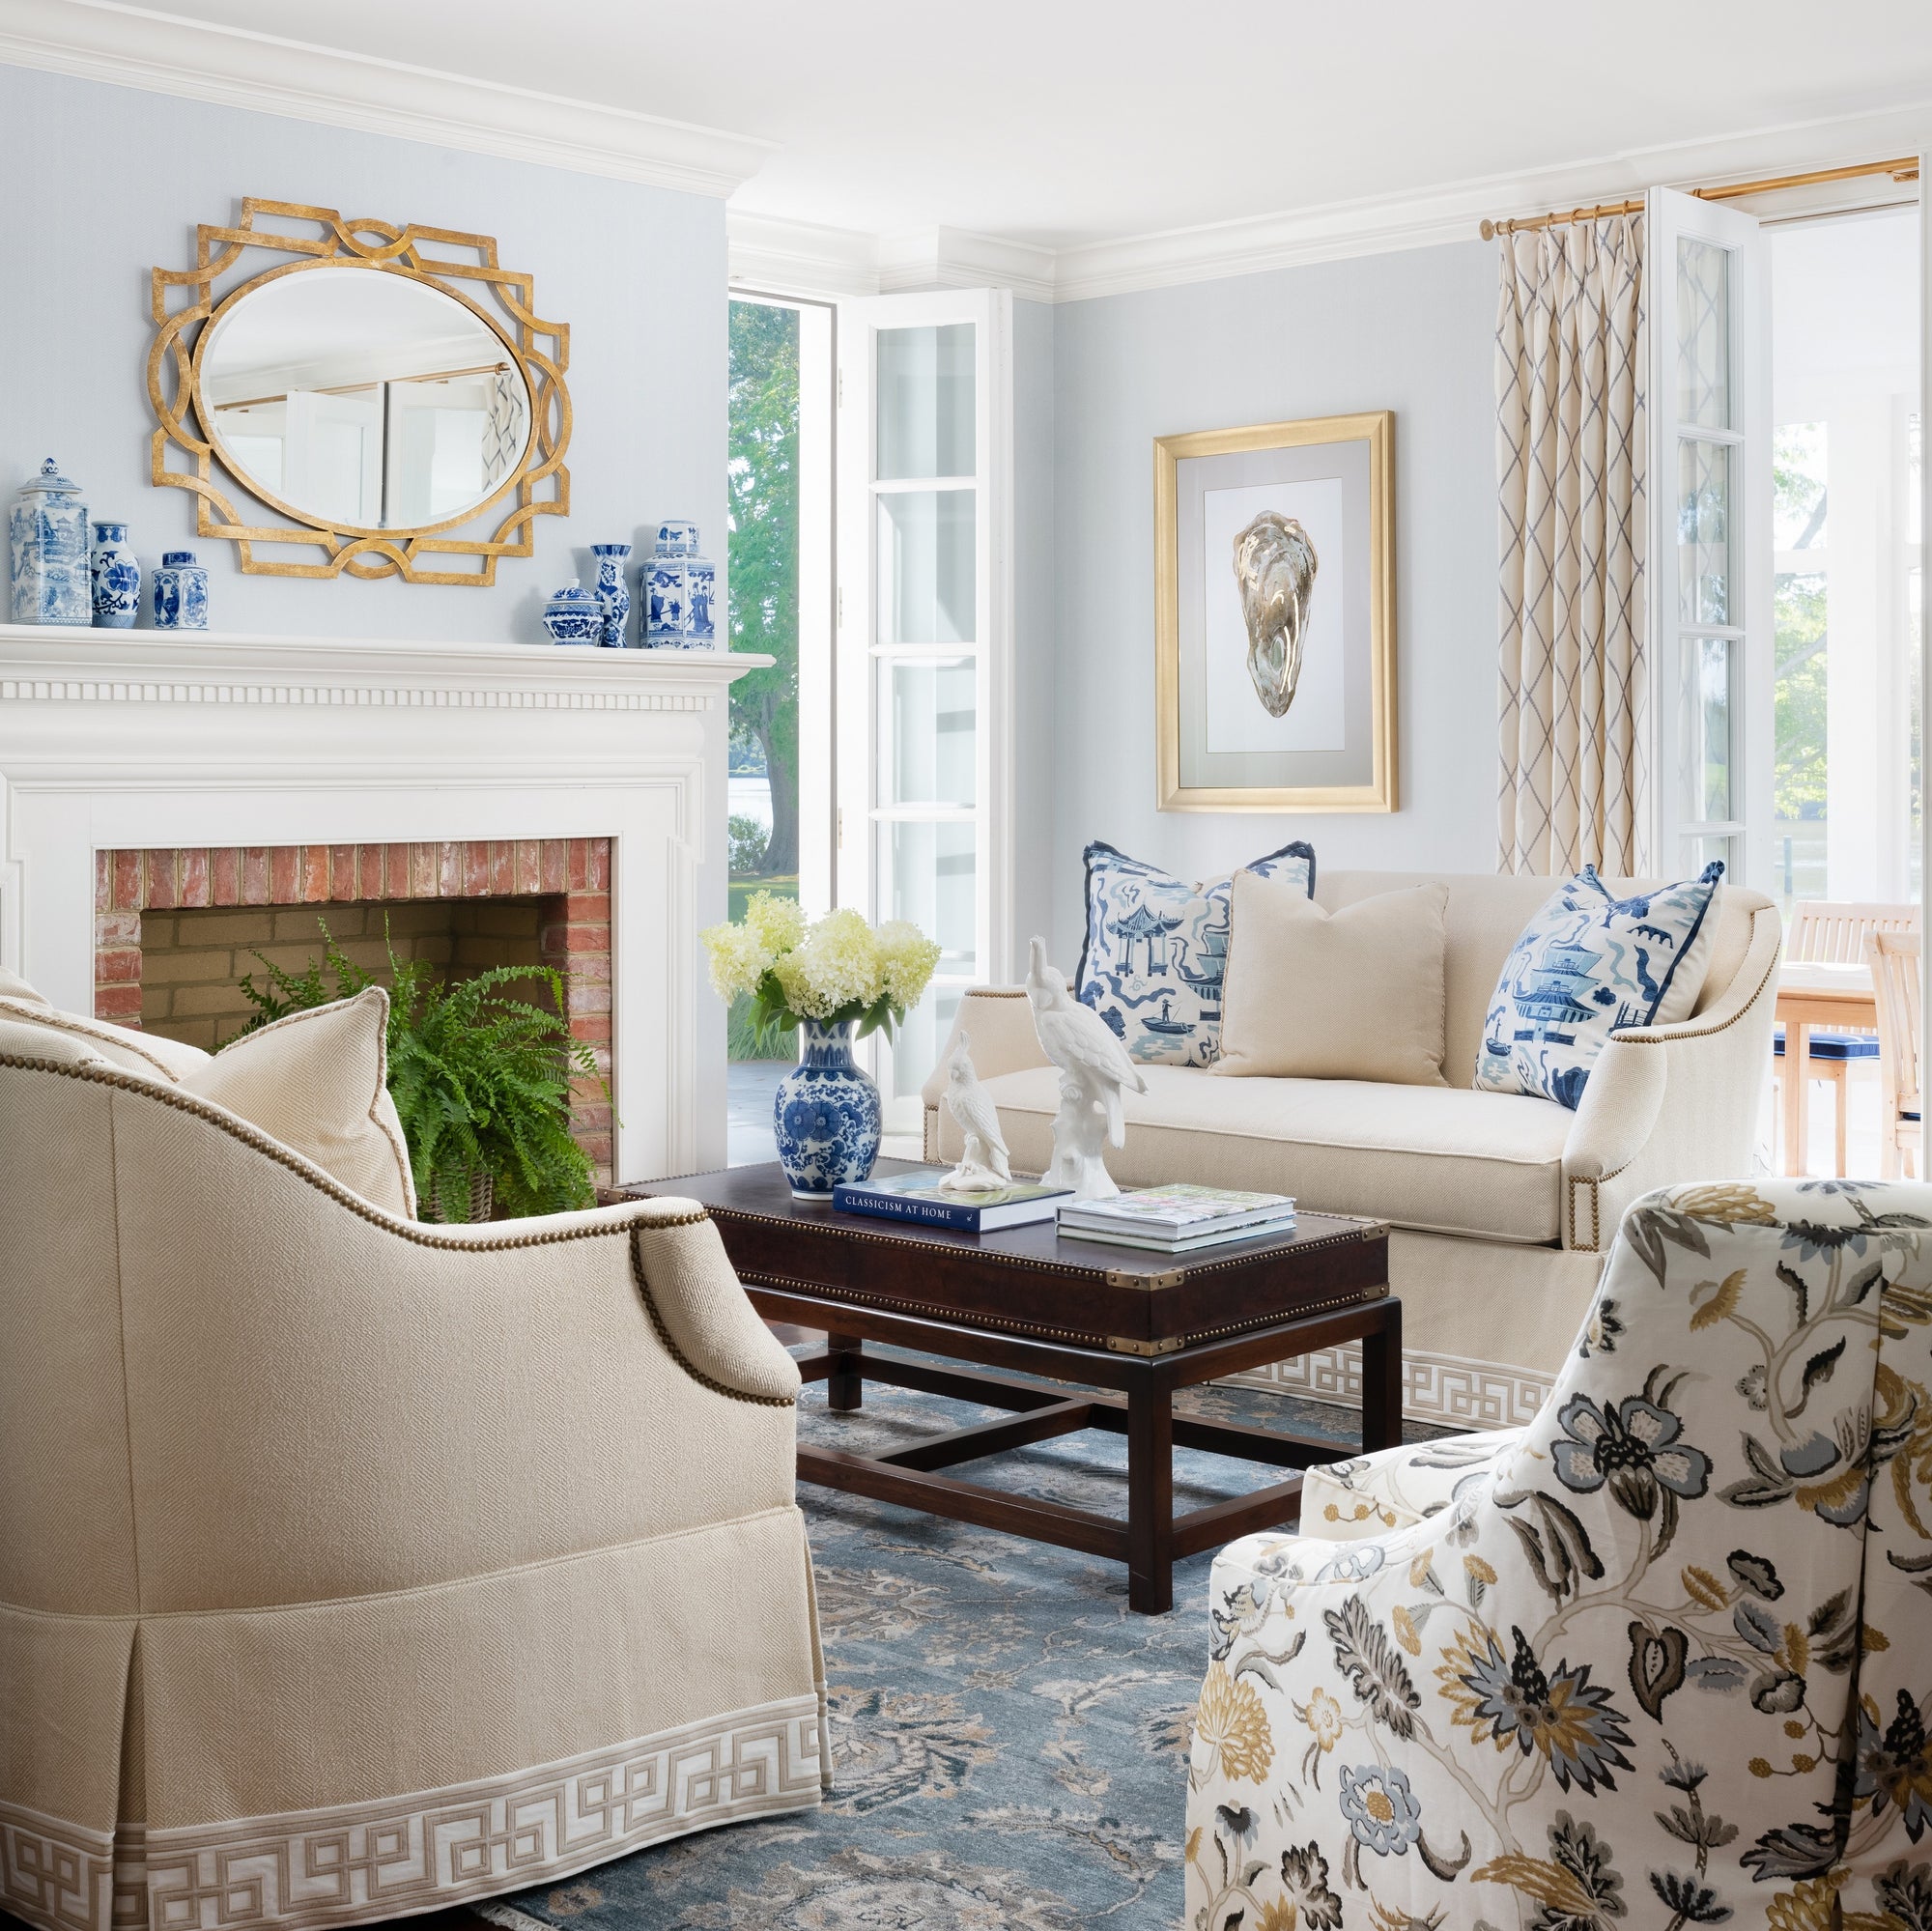 Traditional living room with blue walls and accents, neutral furniture, and natural light. Design by Jamie Merida Interiors.